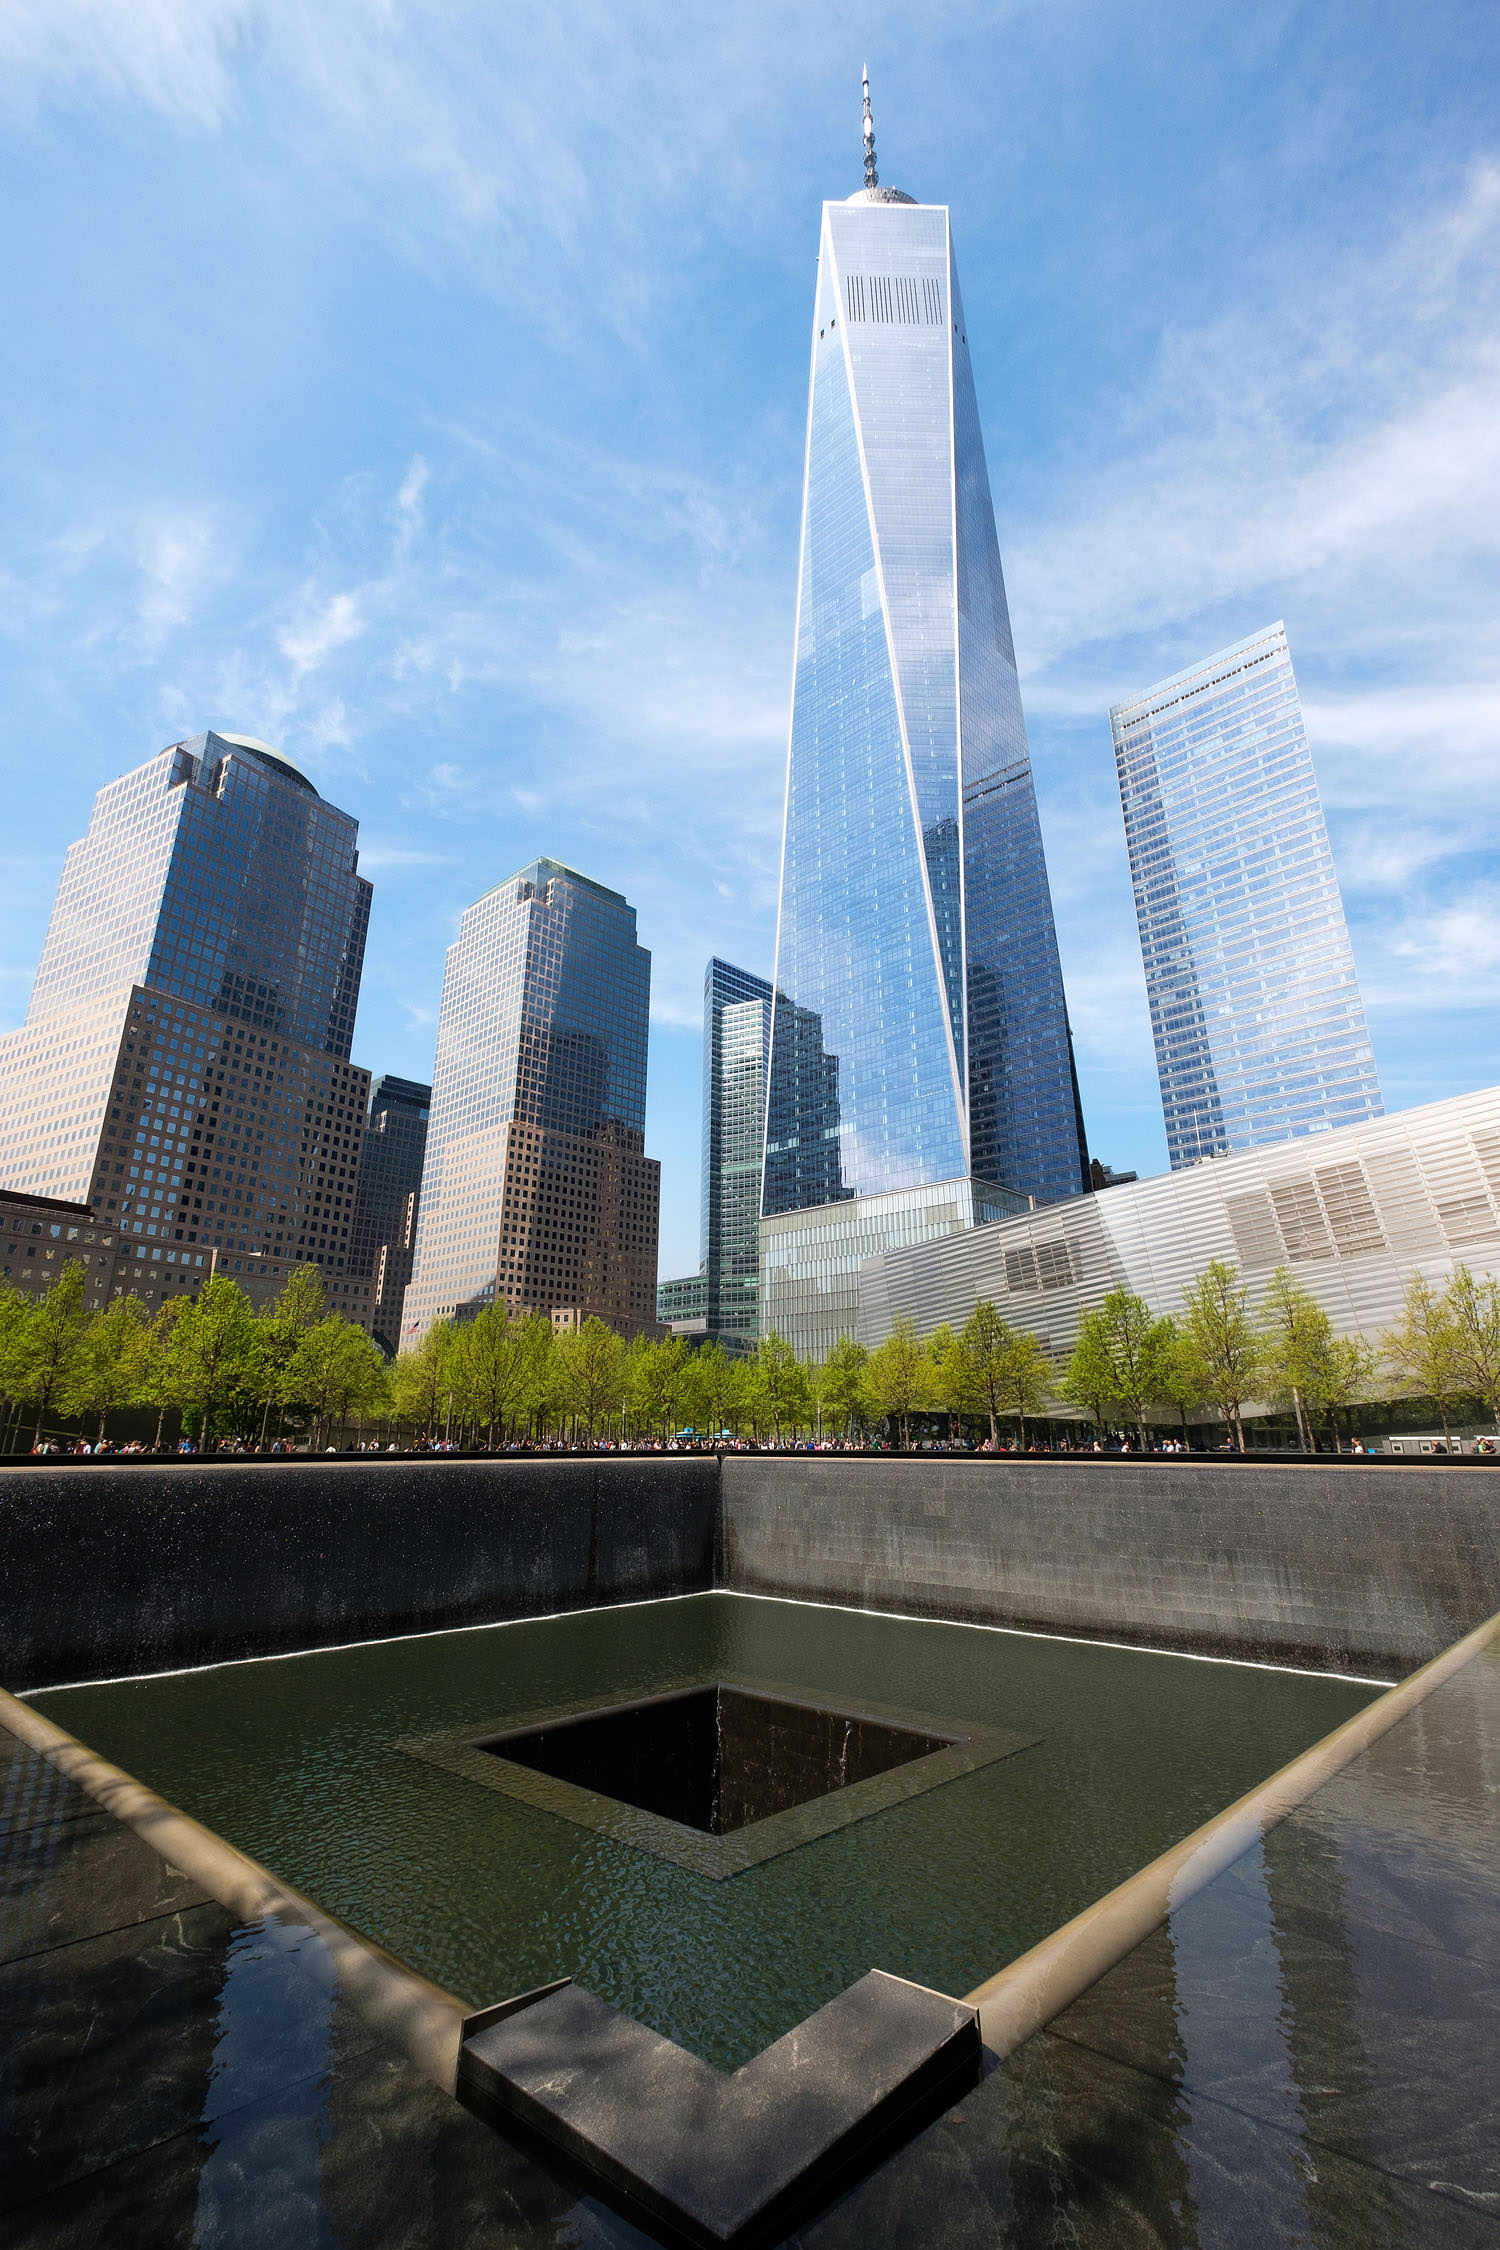 World Trade Center 1 (Freedom Tower) with the 9/11 Memorial